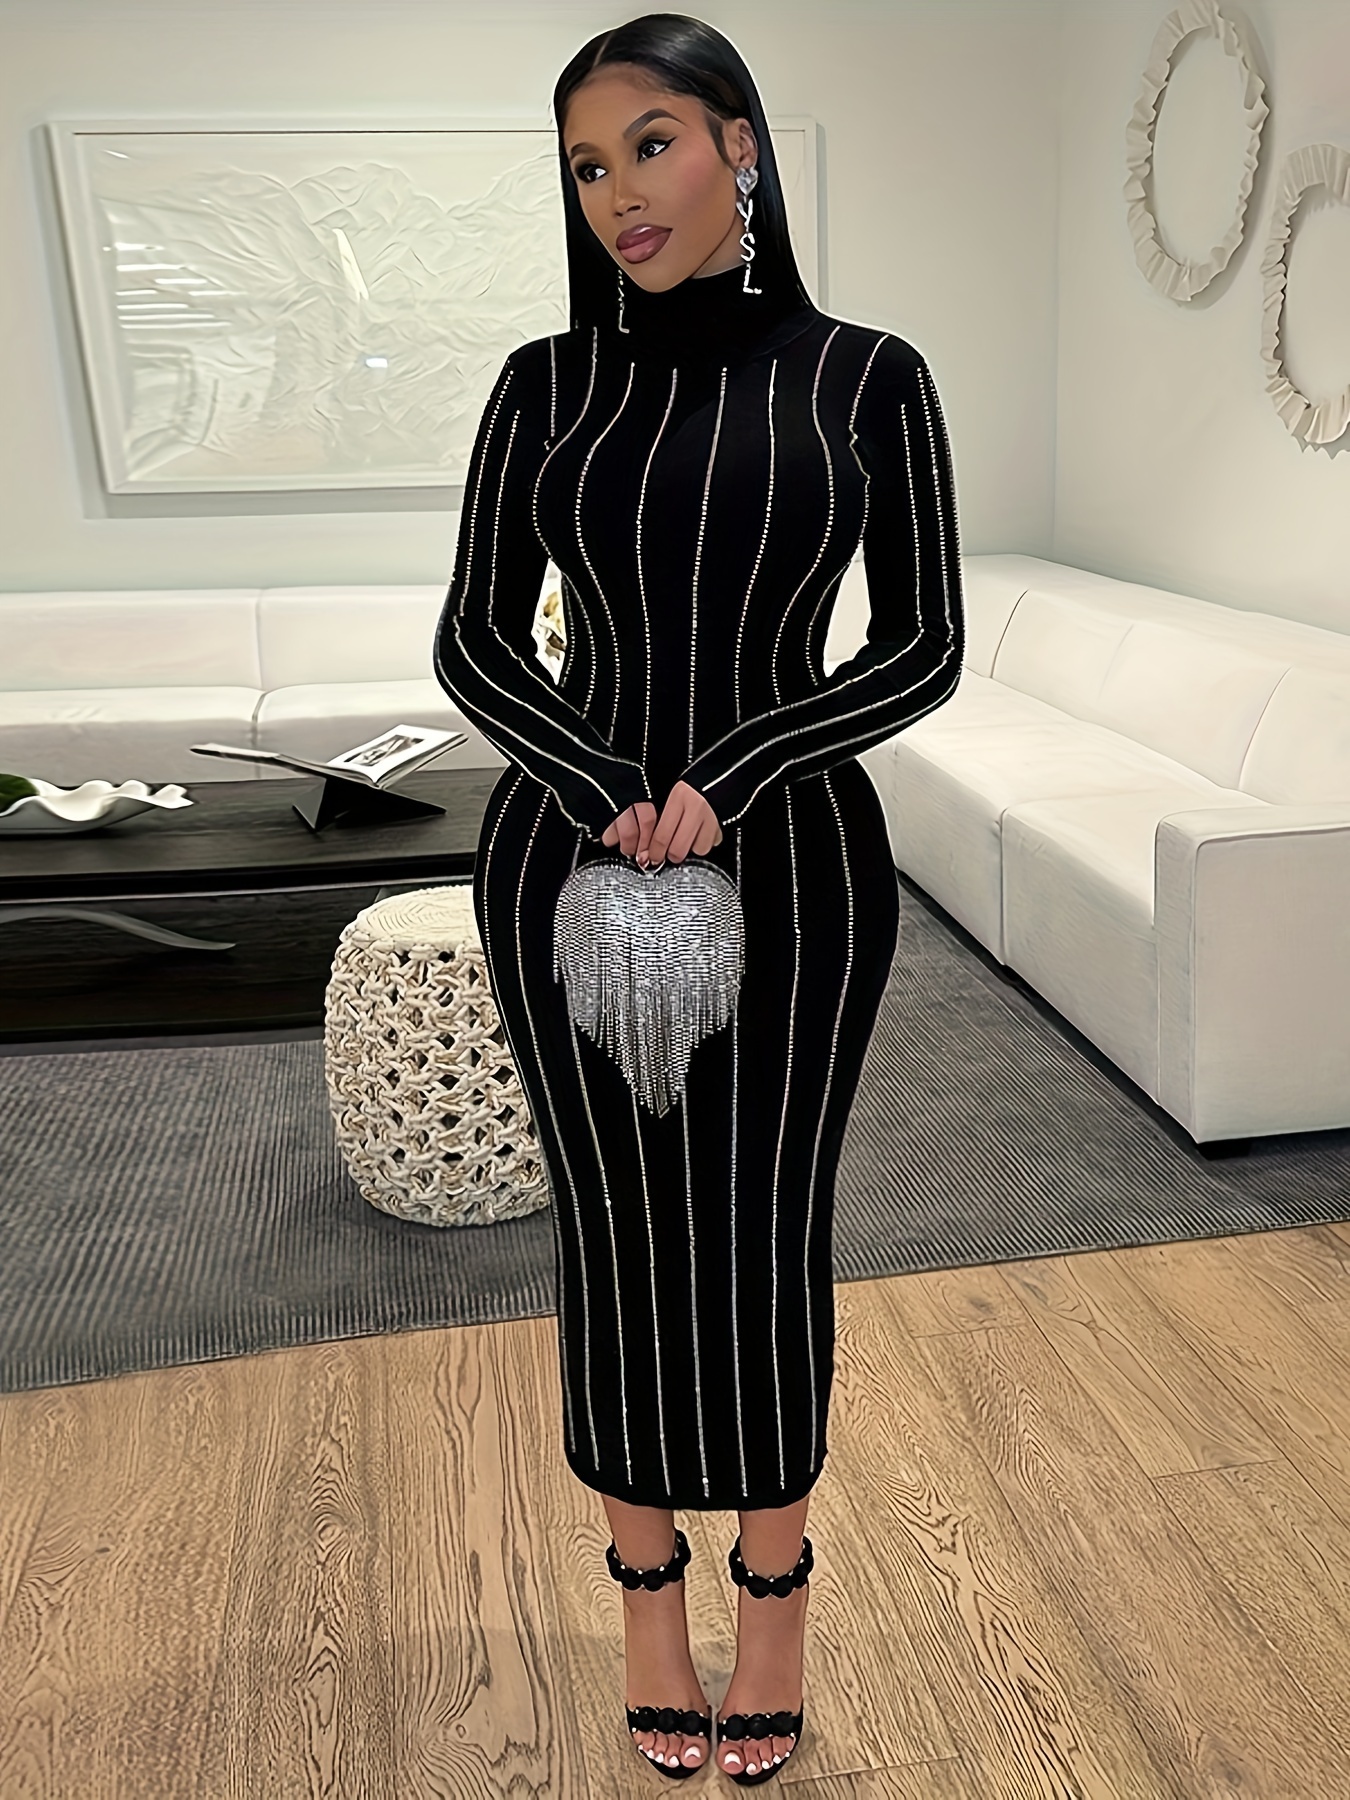 rhinestone long sleeve bodycon black dress elegant high neck solid color party club evening long dresses streetwear for fall winter womens clothing